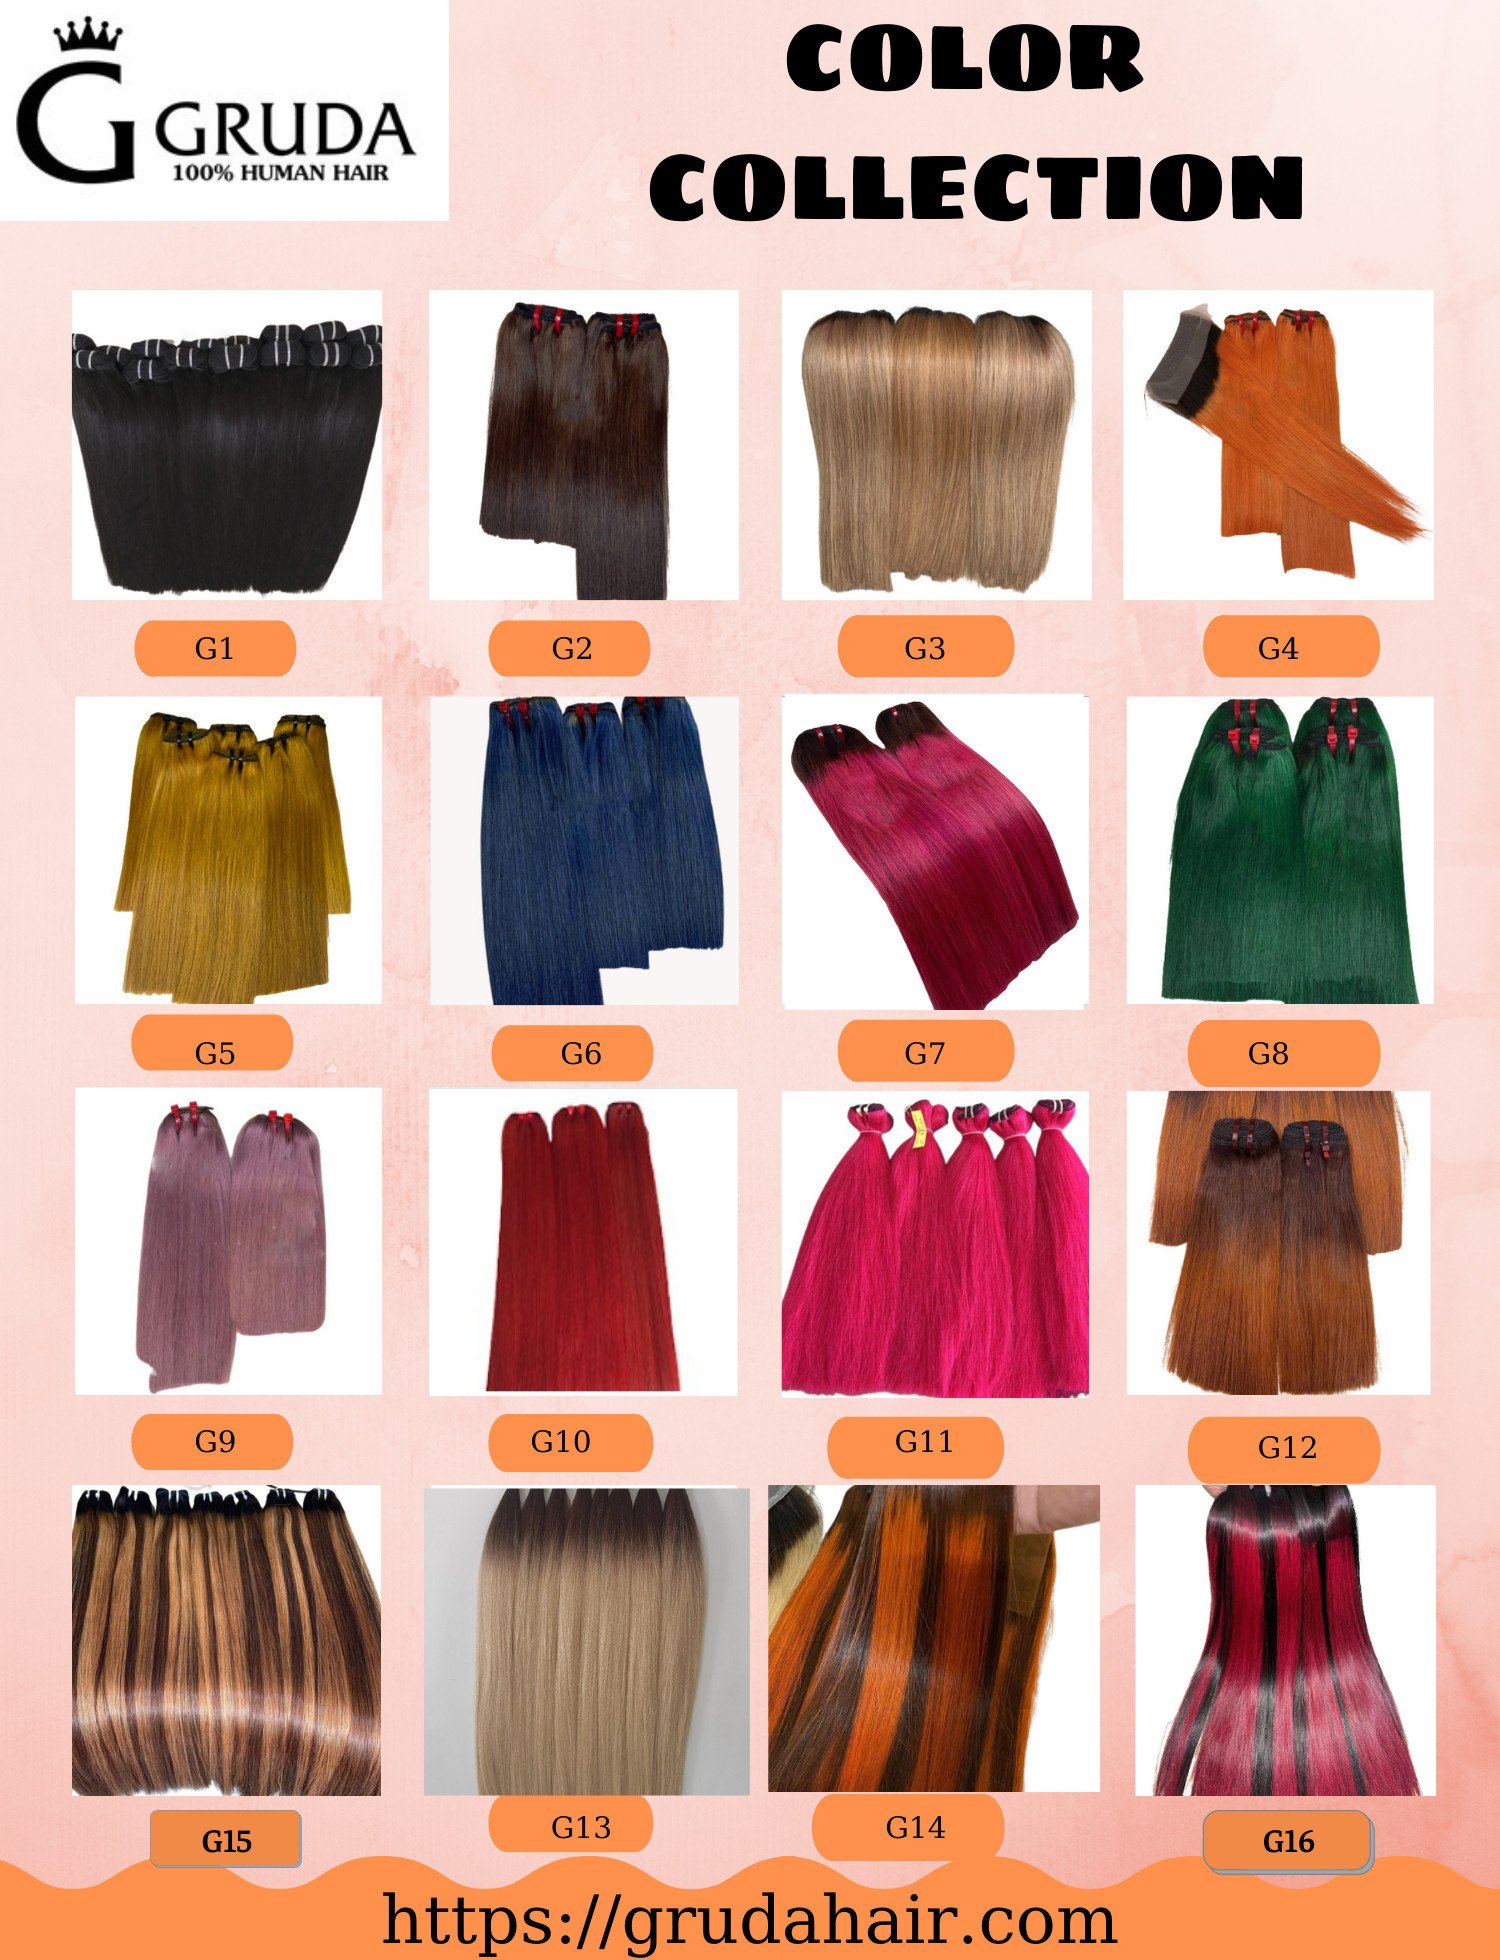 Many colors for hair in Gruda Hair